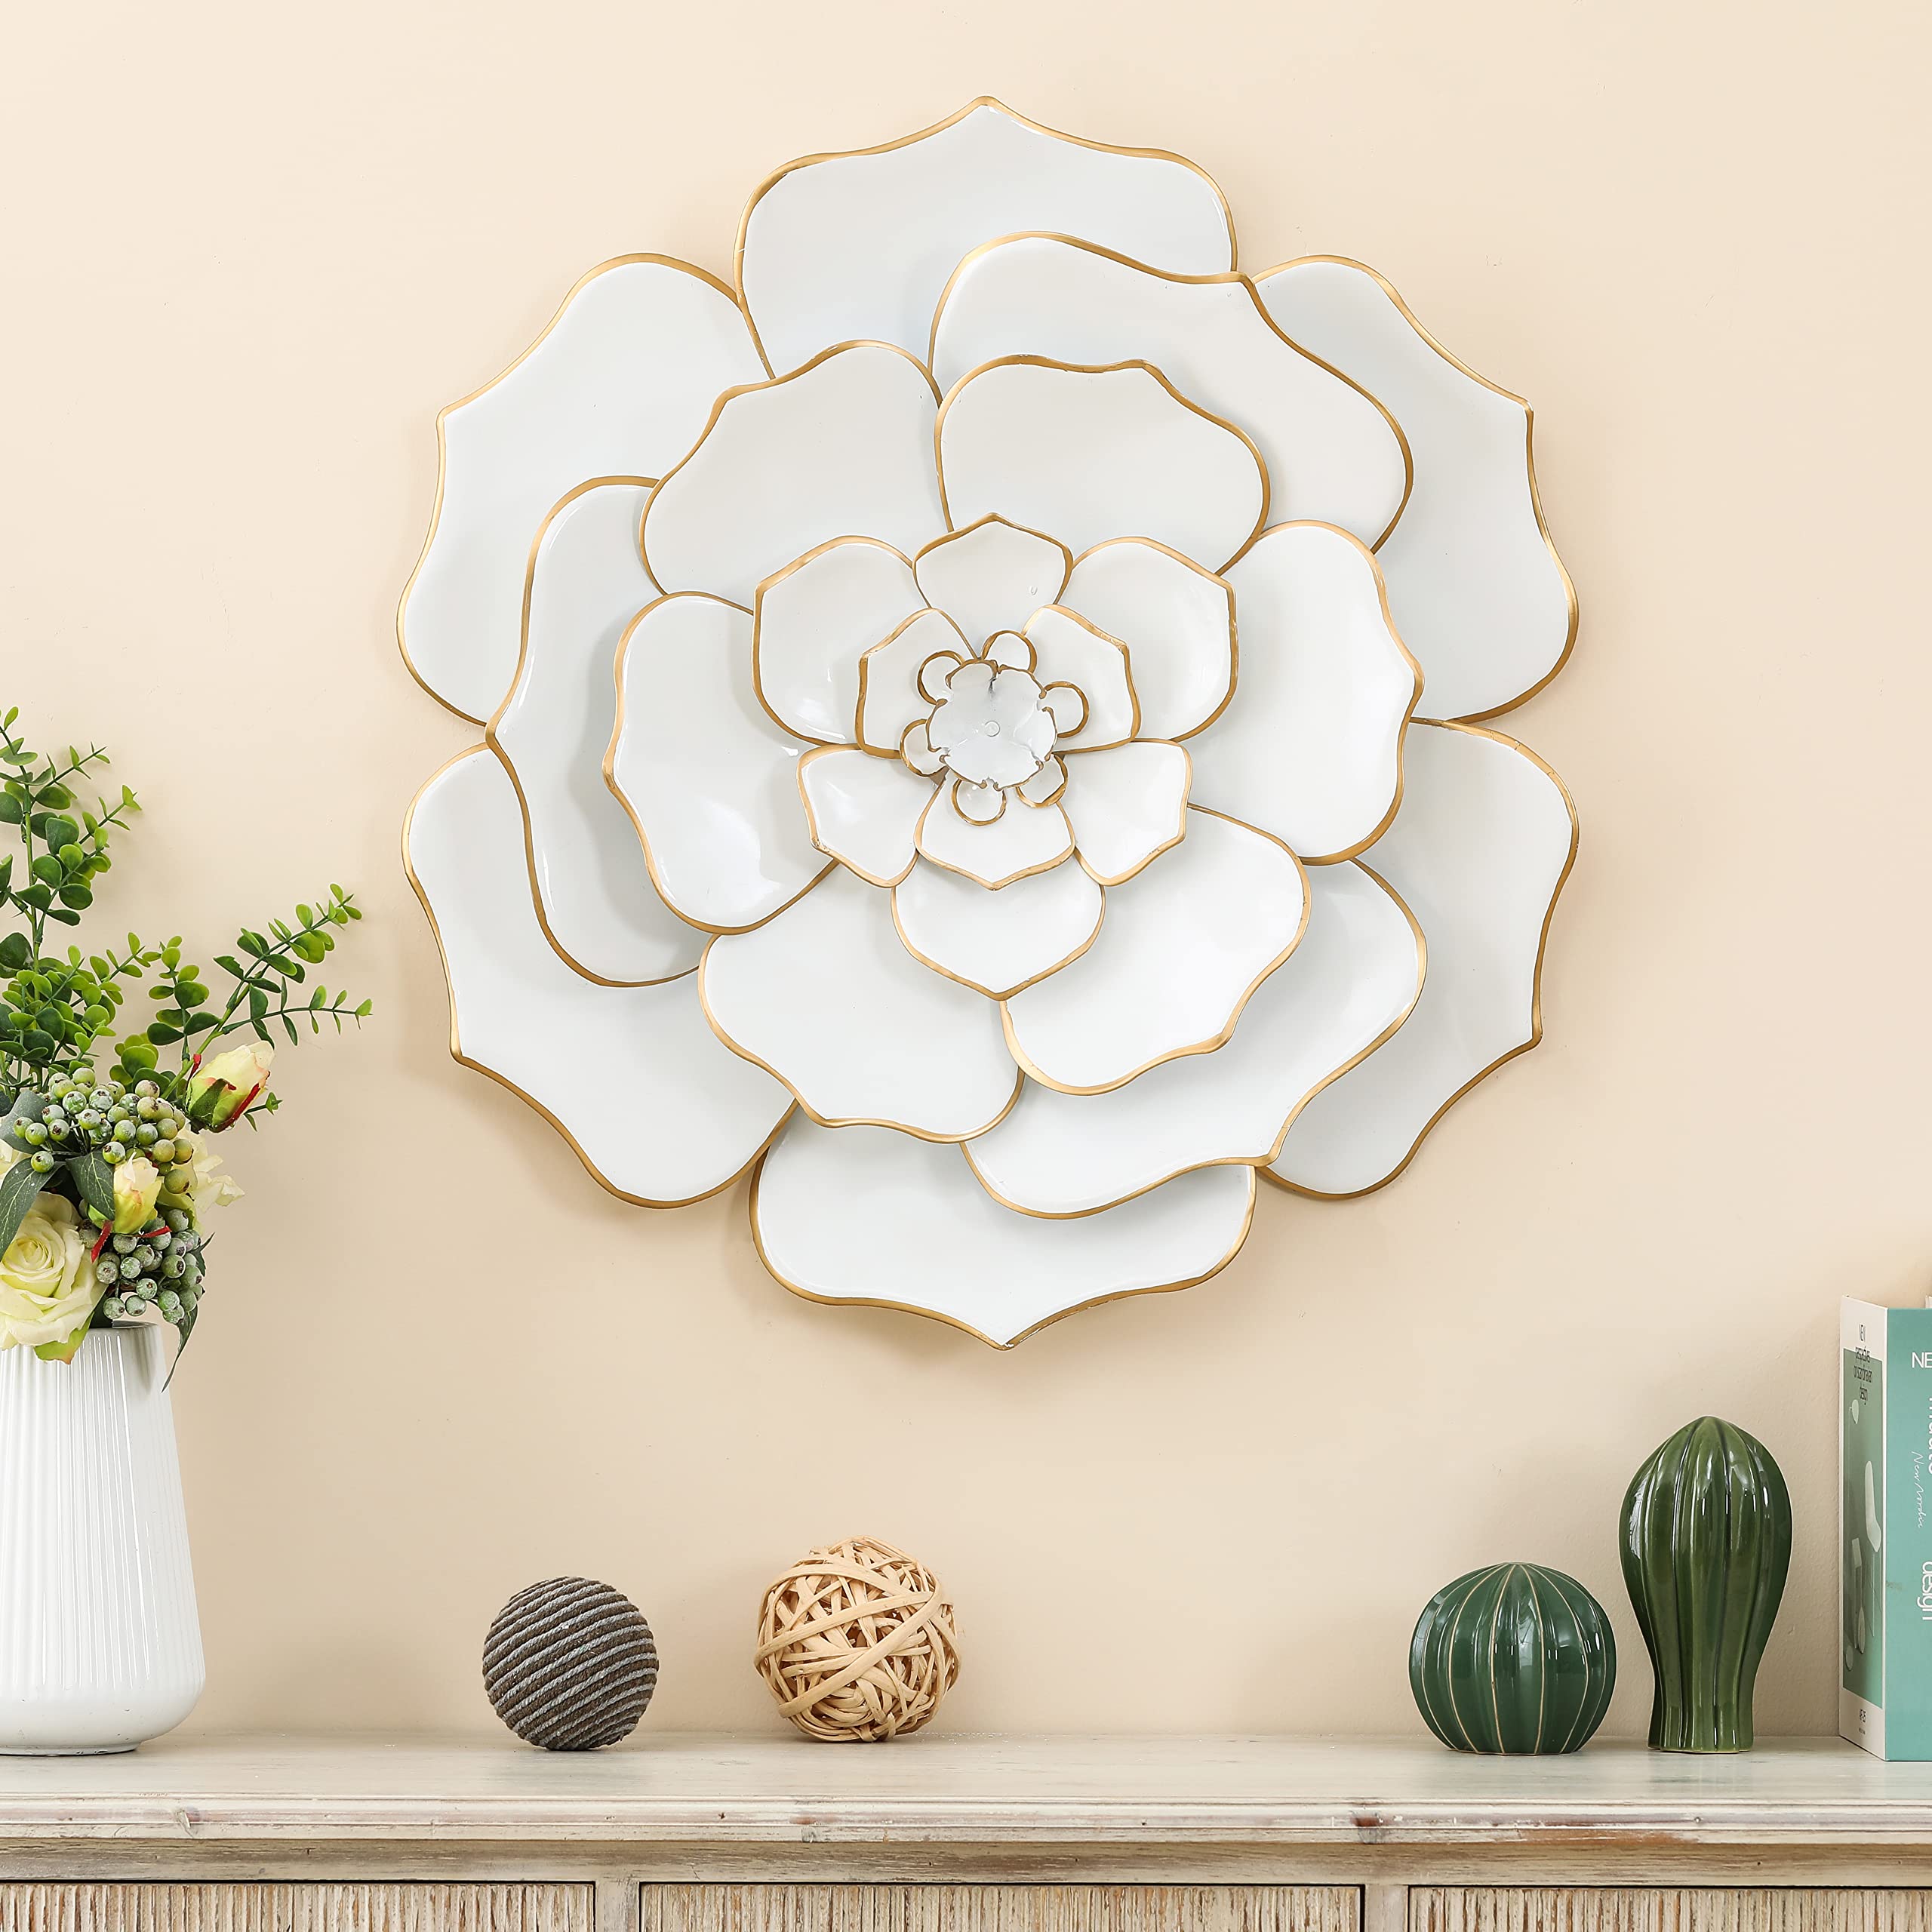  White Glass Flowers with Stems Flower Wall Decor Art